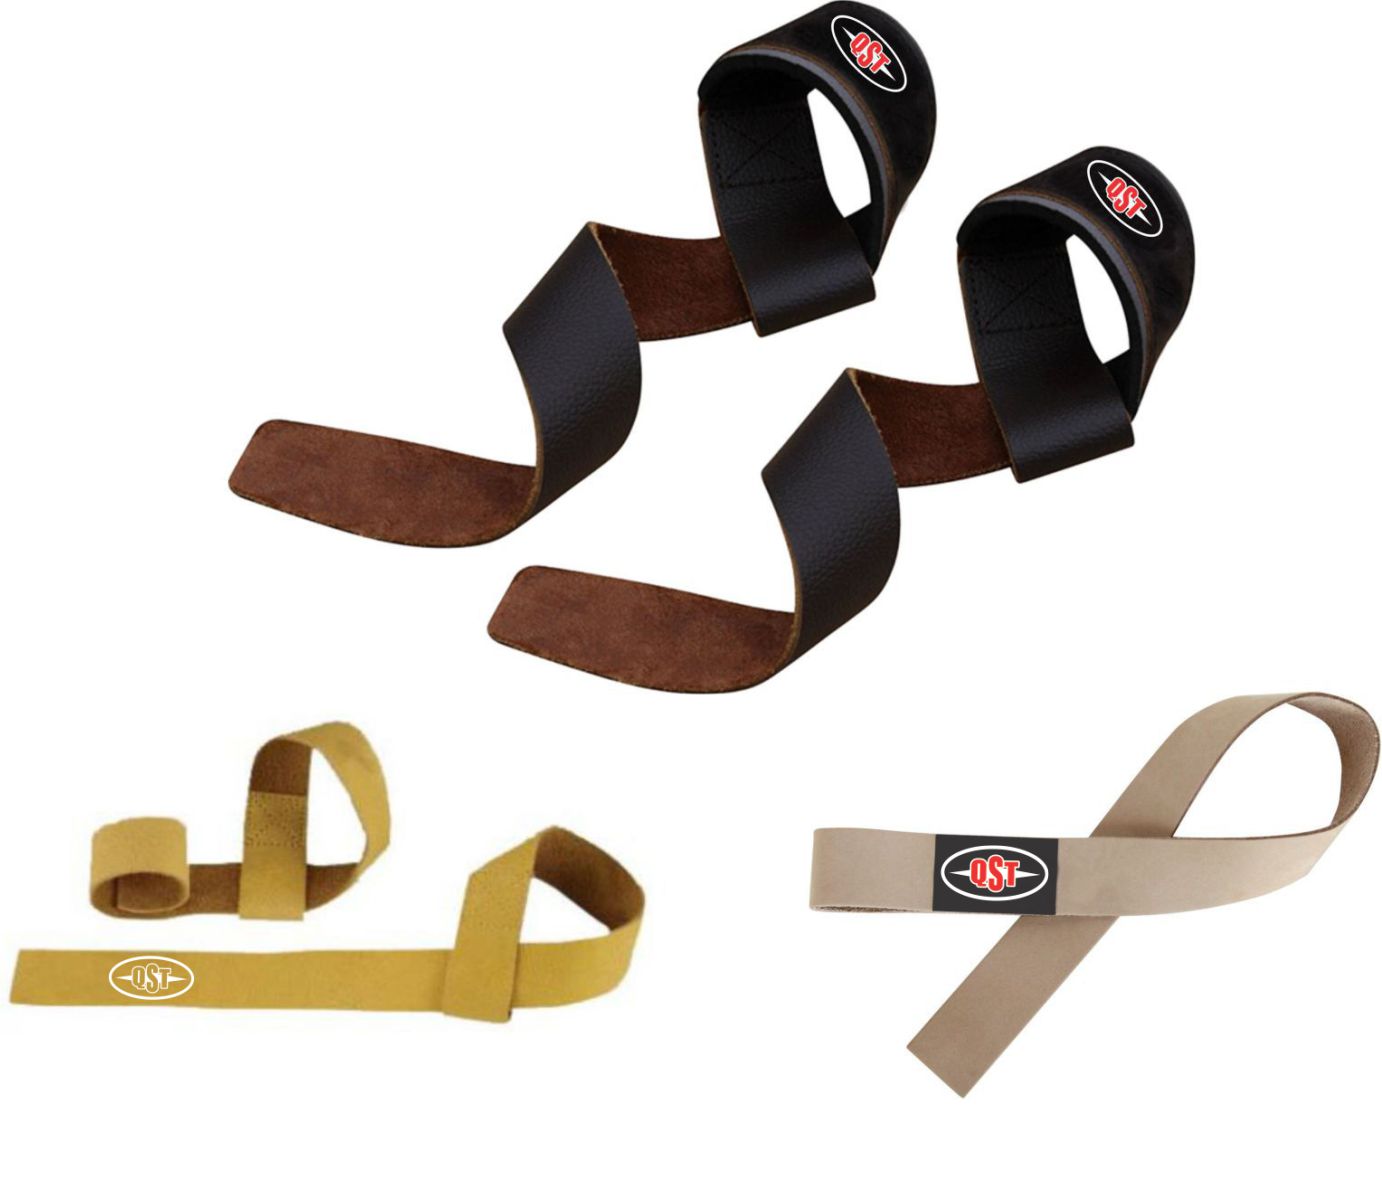 Weight lifting Straps - Dead Lifting Straps - Leather Lifting